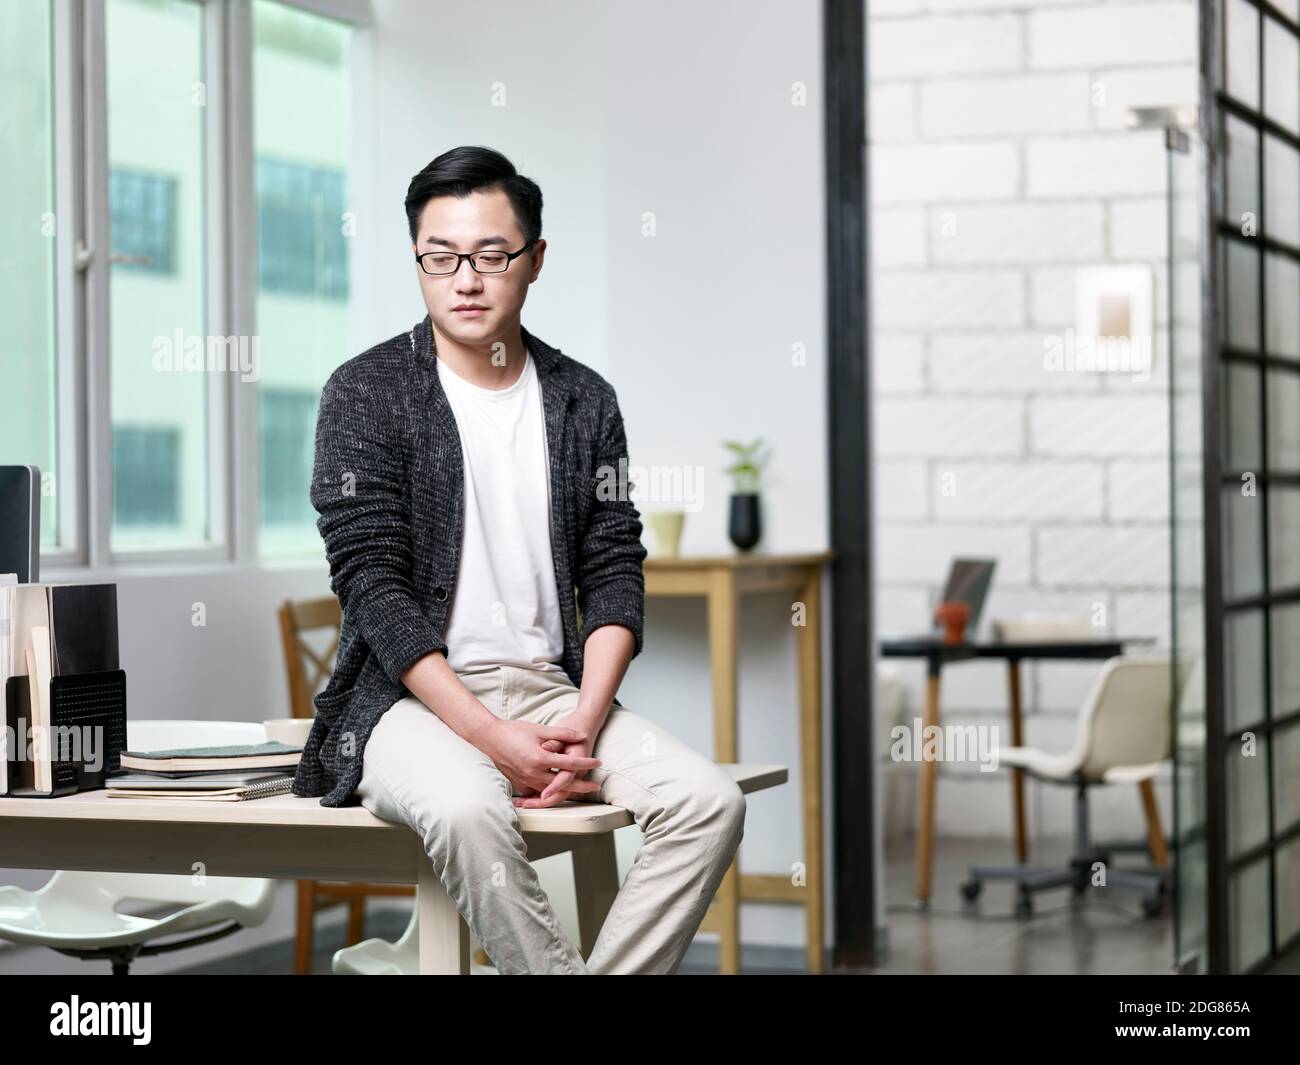 portrait of young asian businessman sitting on desk in office looking down Stock Photo